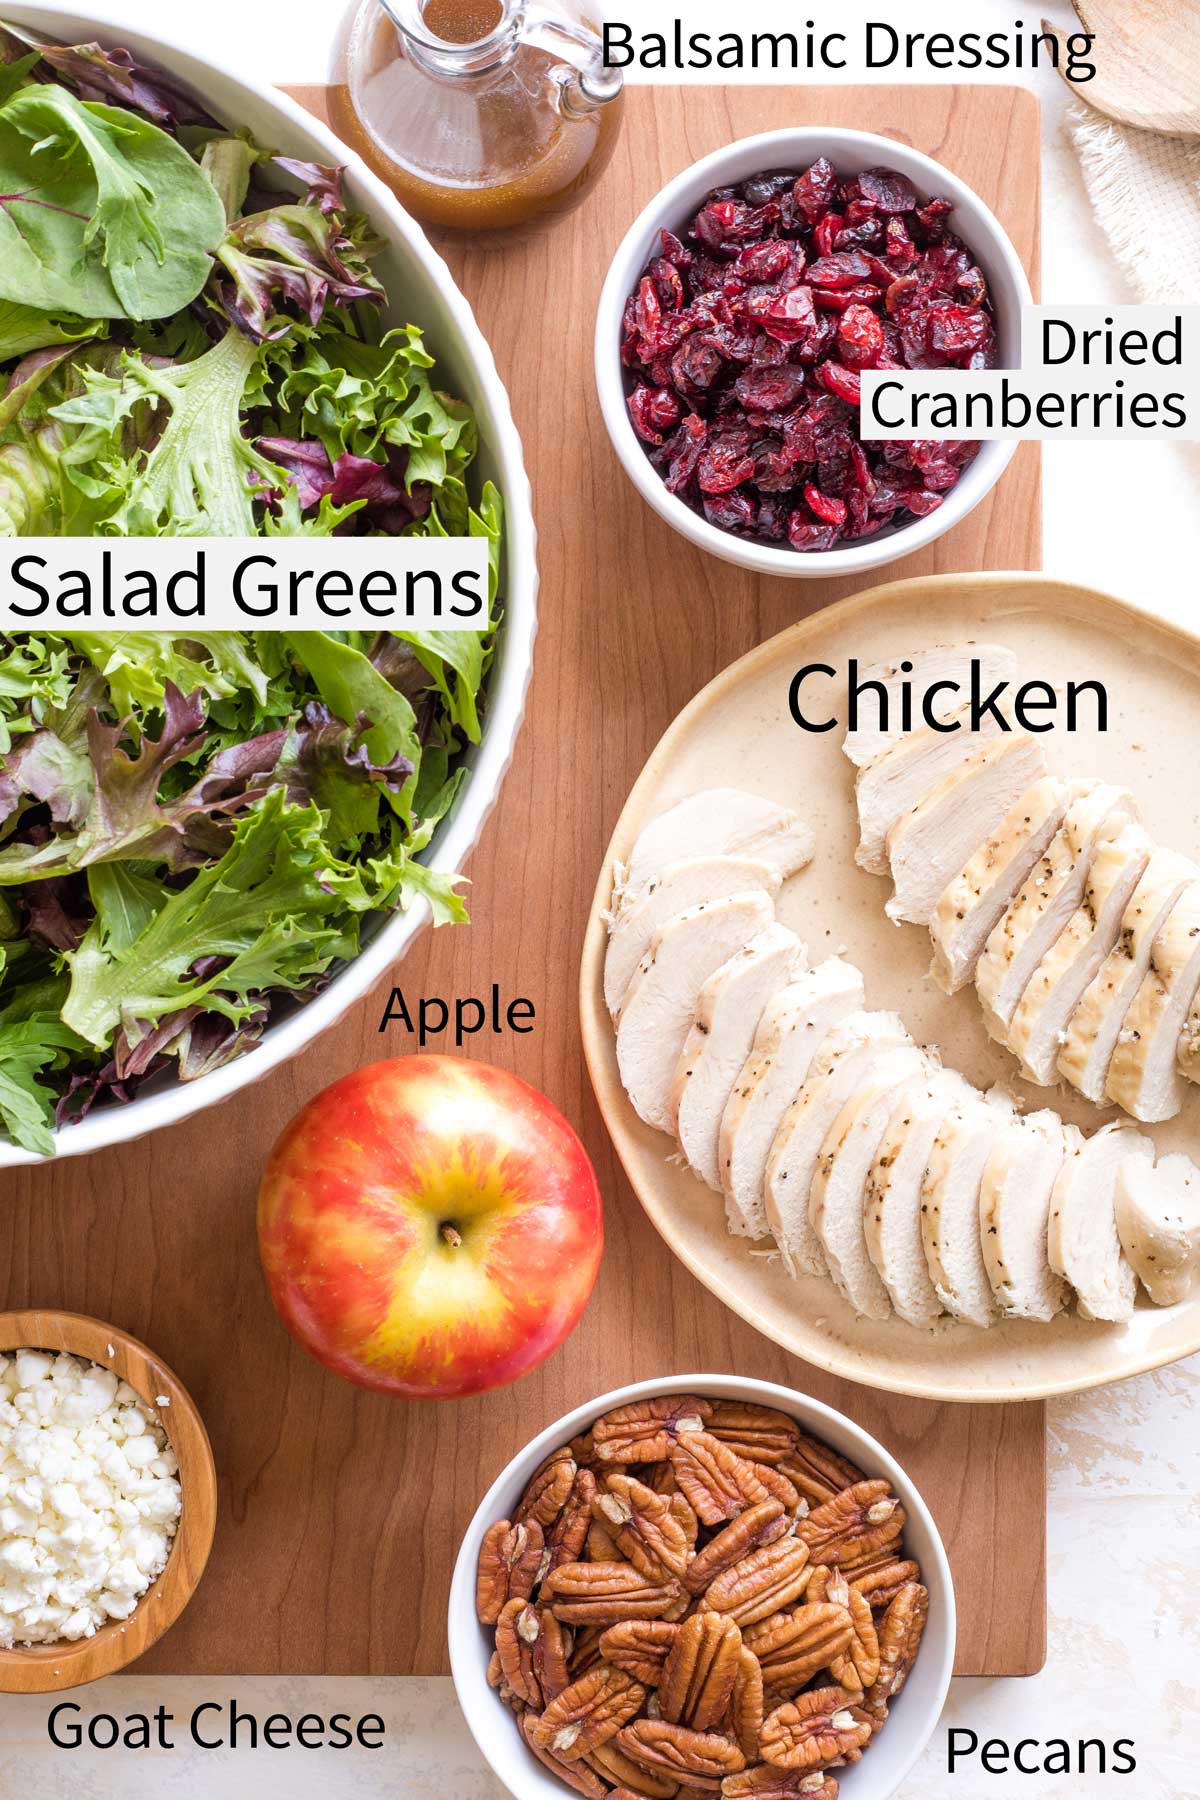 Flatlay of ingredients with labels: Salad Greens, Balsamic Dressing, Dried Cranberries, Chicken, Pecans, Apple, Goat Cheese.